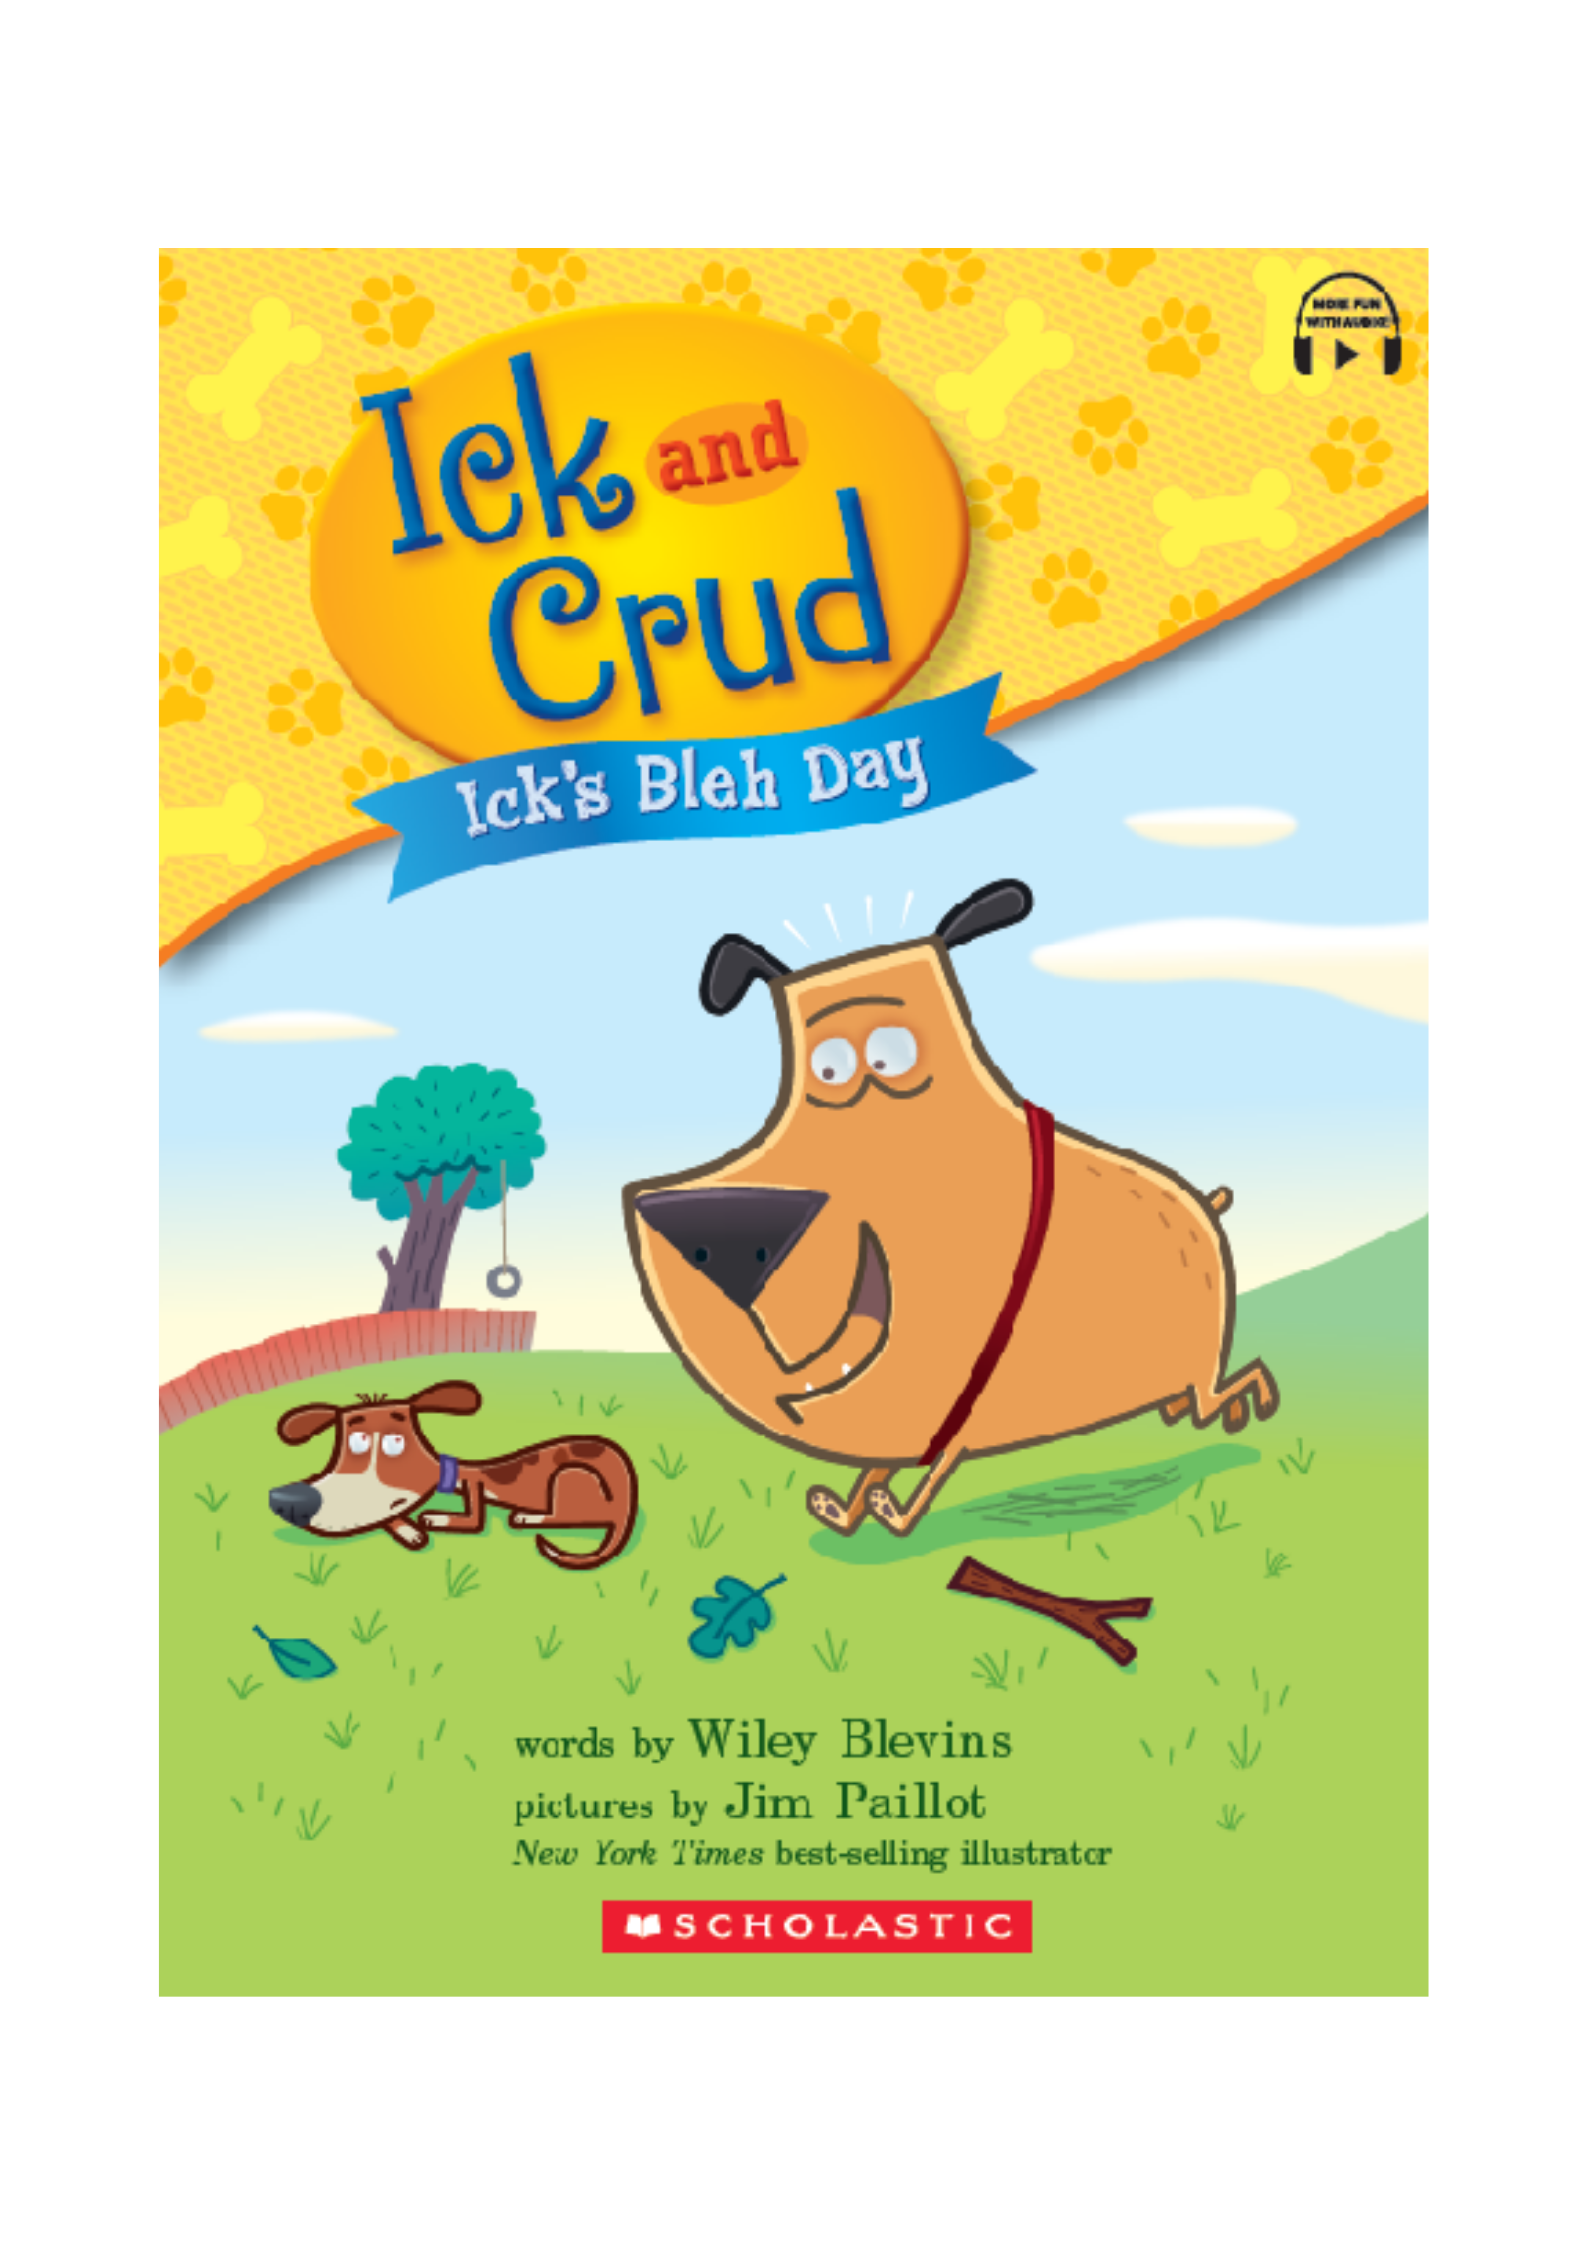 Ick and Crud: Ick’s Bleh Day